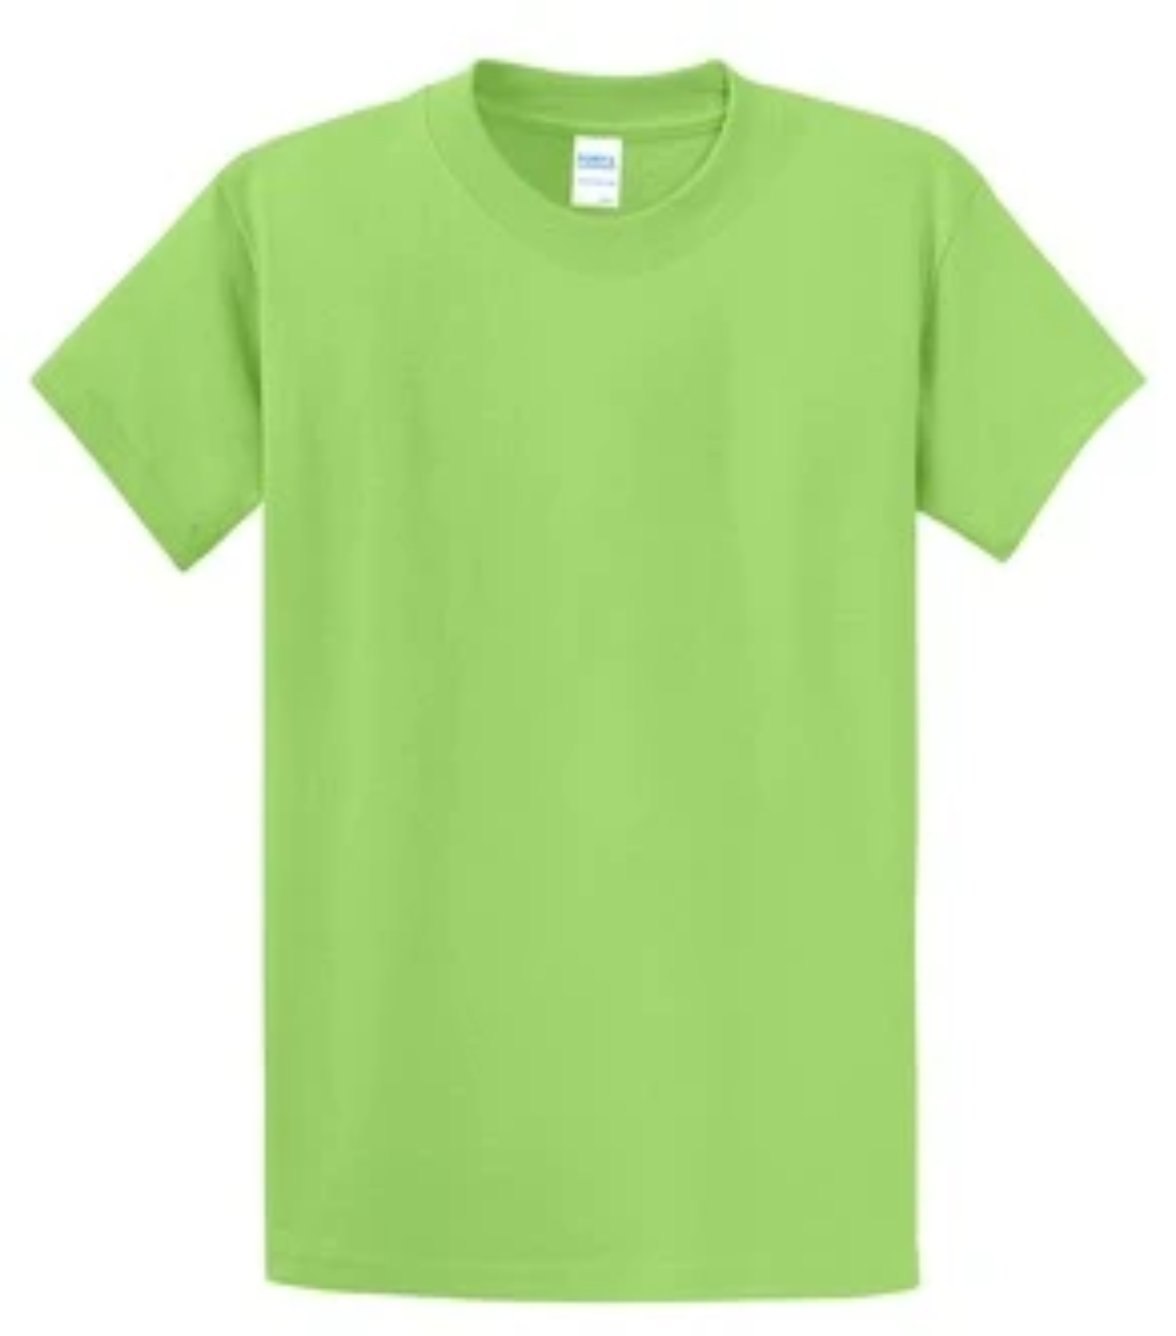 Port & Company 100% Cotton Essential T-Shirt Lime Tall PC61T